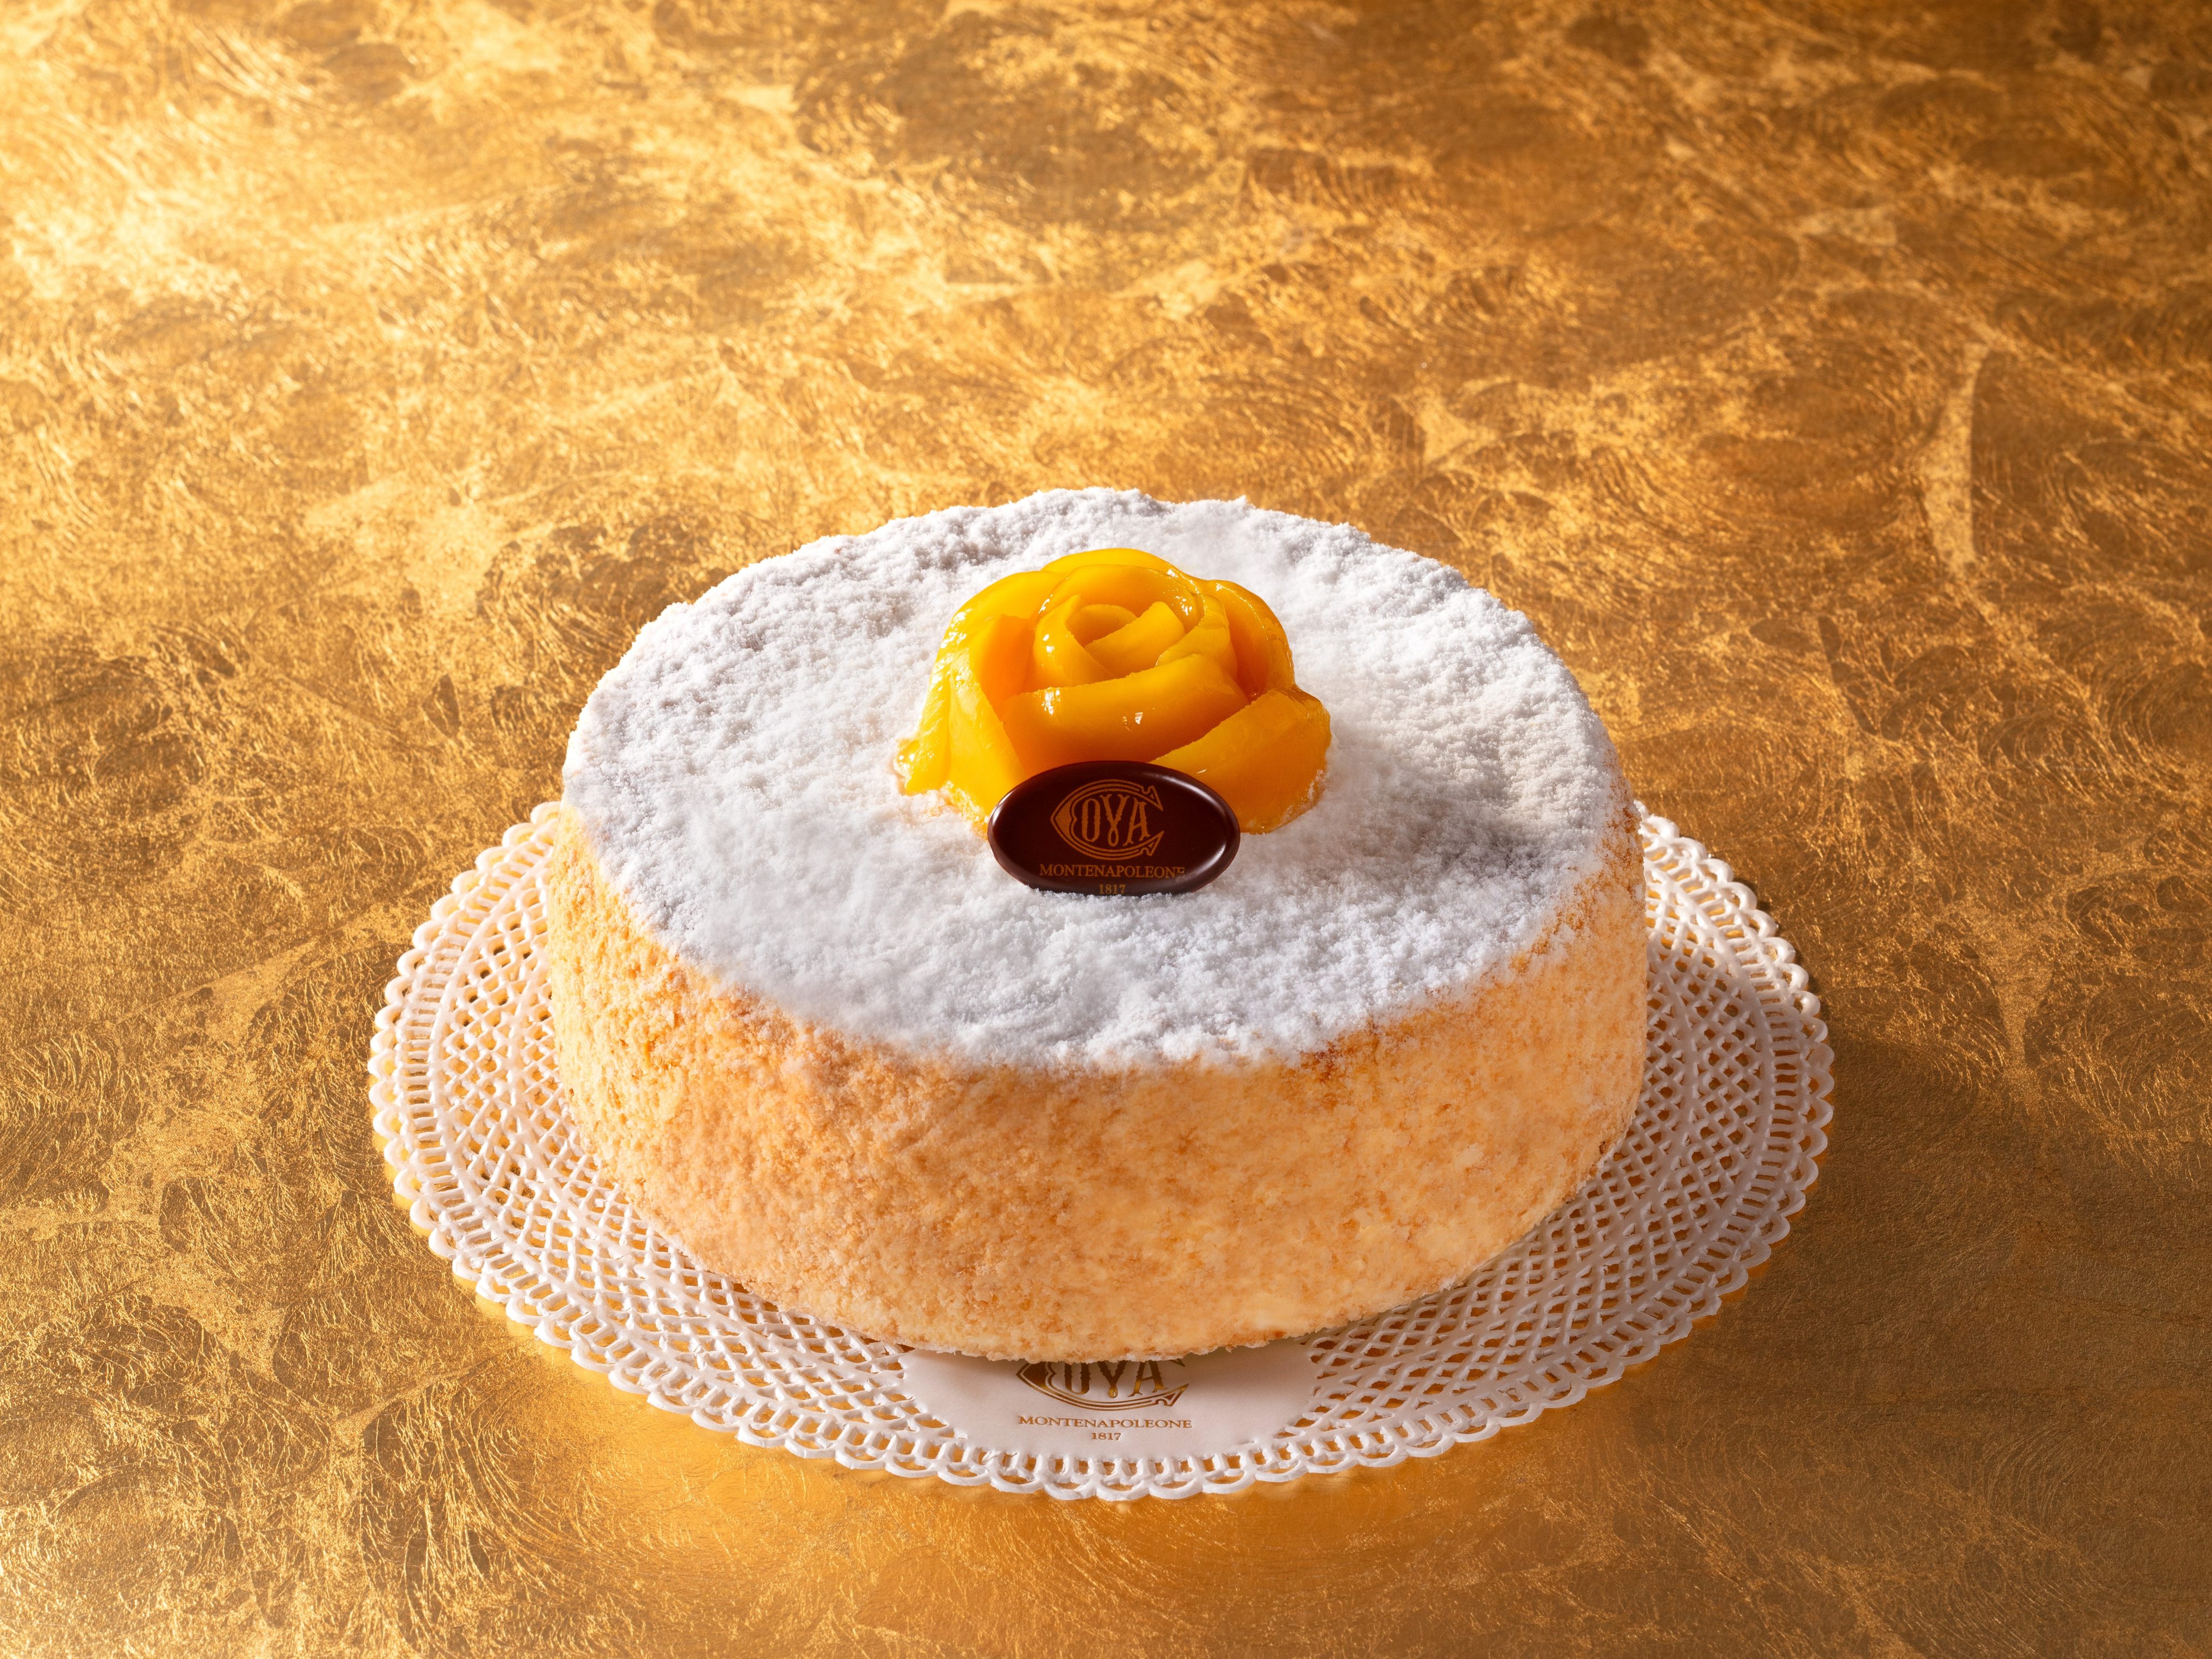 Italian dessert specialist Cova is celebrating 30 years in Hong Kong with a limited-edition mango millefoglie, which is a riff on its  mango dome cake, and a five-course fine-dining menu, until June 15. Photo: Cova